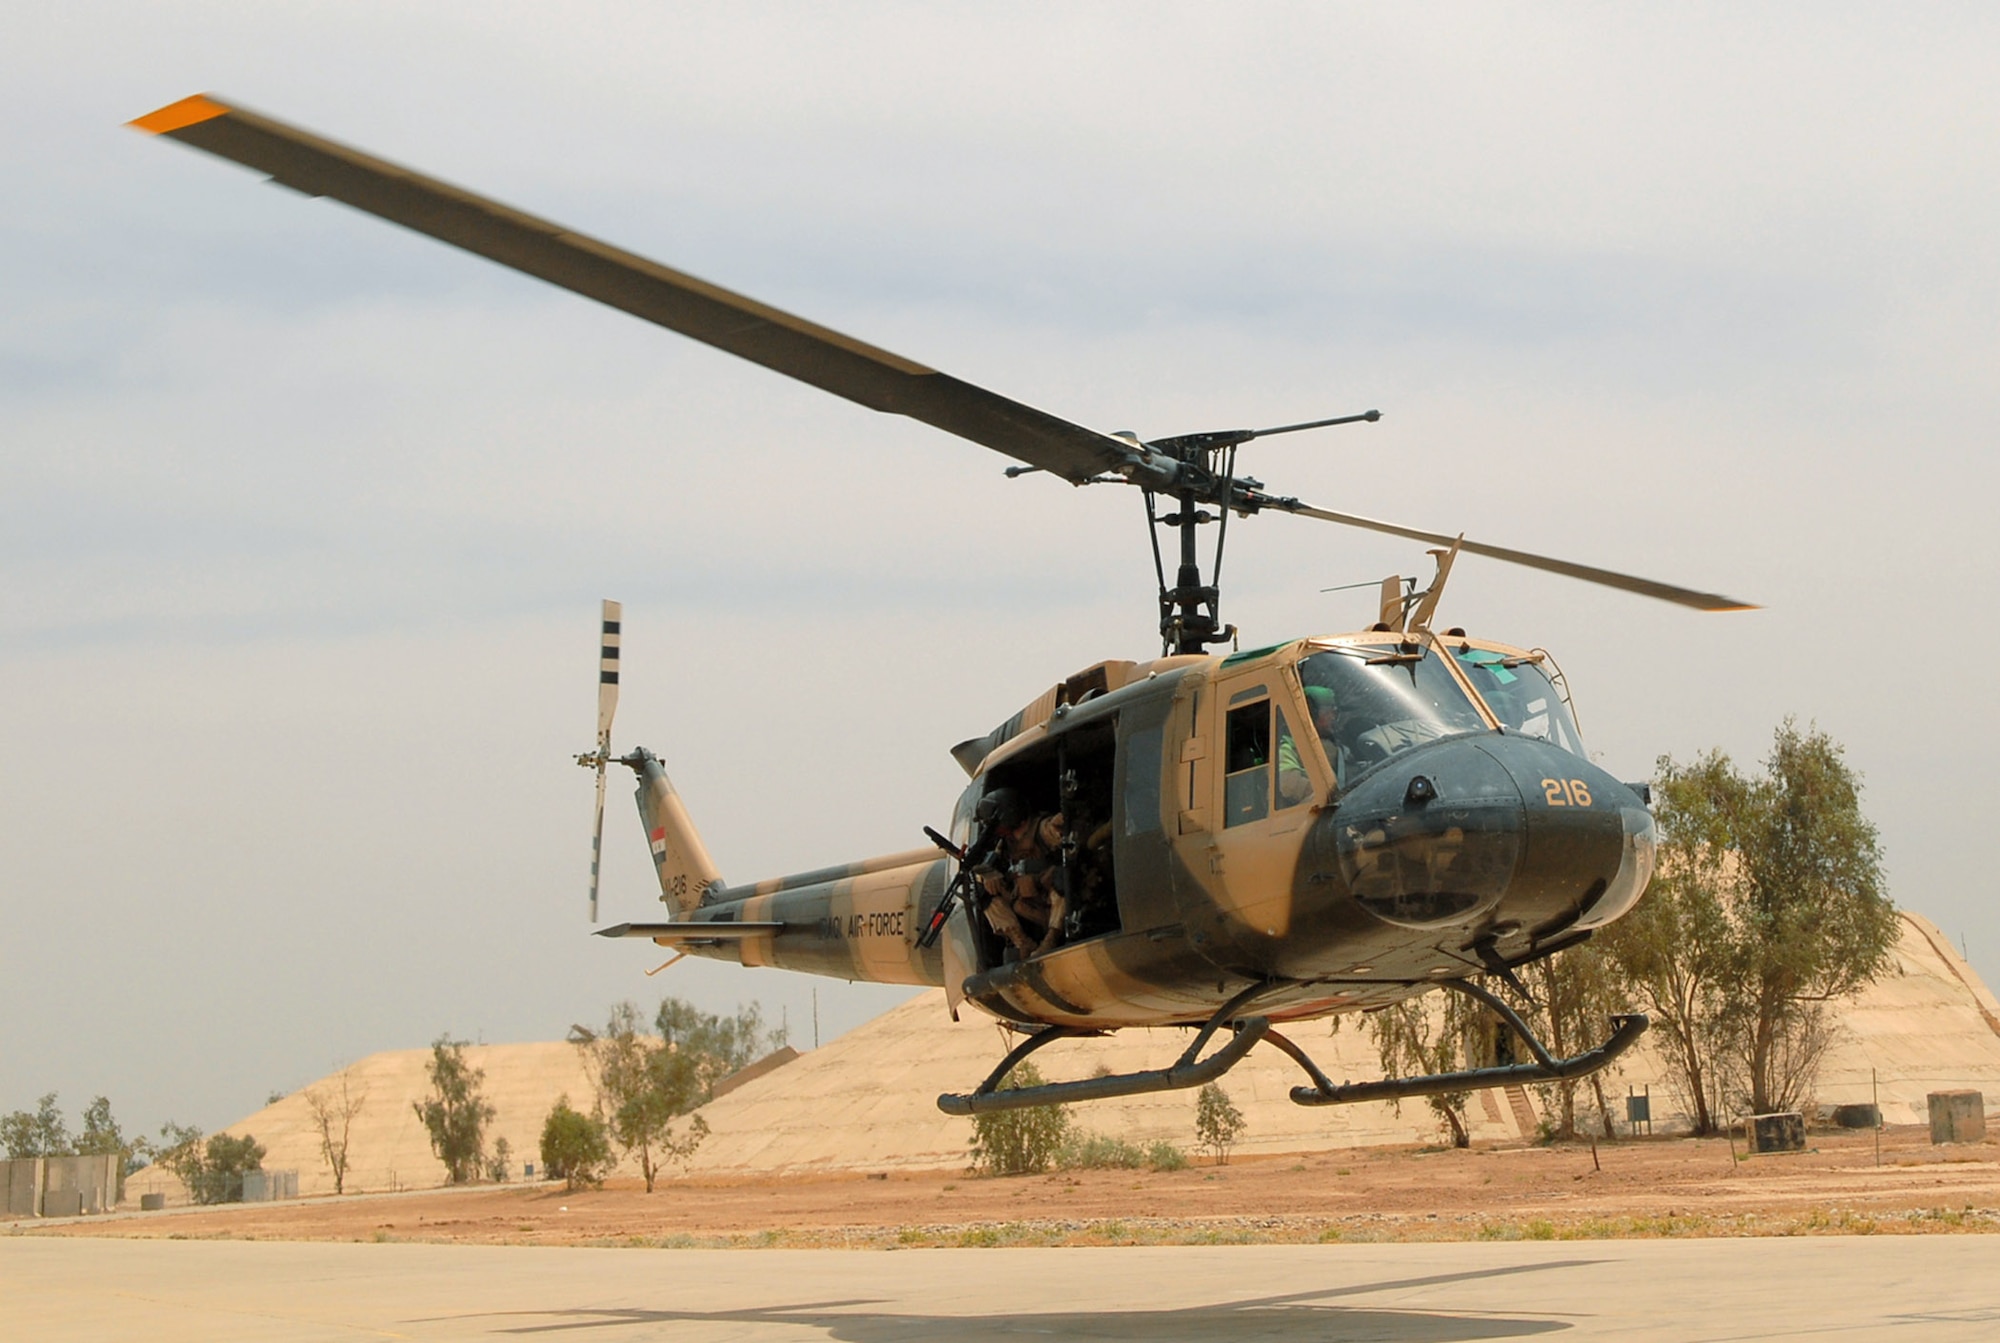 An Iraqi air force medical evacuation mission was flown in an Iraqi air force Huey II helicopter May 14 from the Air Force Theater Hospital at Balad Air Base, Iraq, to the U.S. Army's 86th Combat Support Hospital in Baghdad. (U.S. Air Force photo/Senior Airman Julianne Showalter) 
